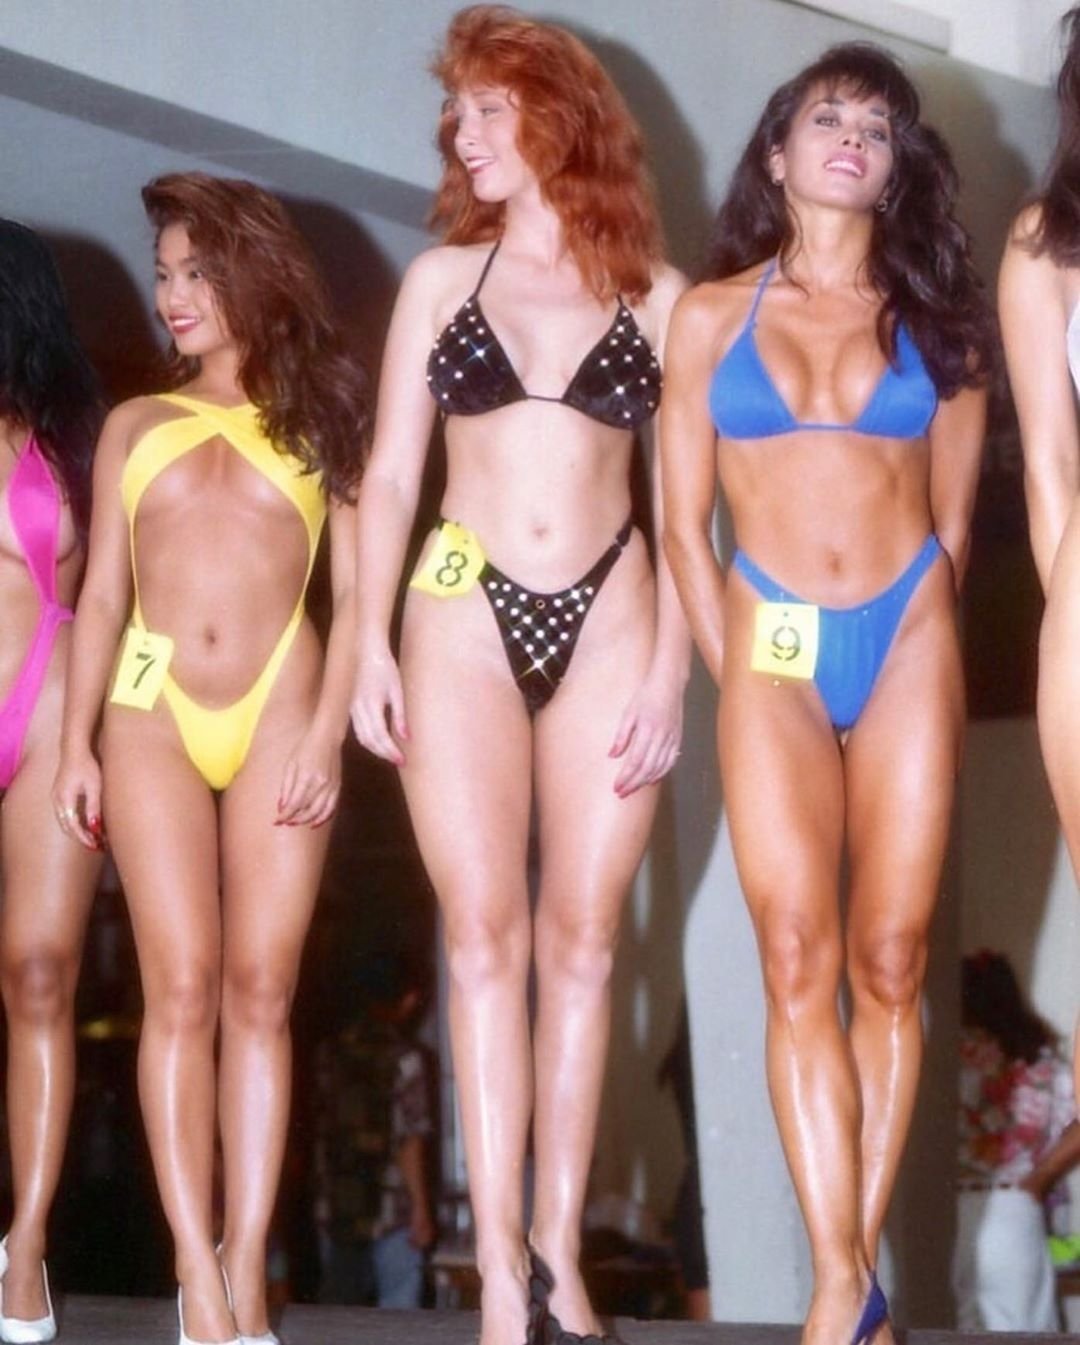 "A 1992 bikini contest in Florida since summer's close and we nee...